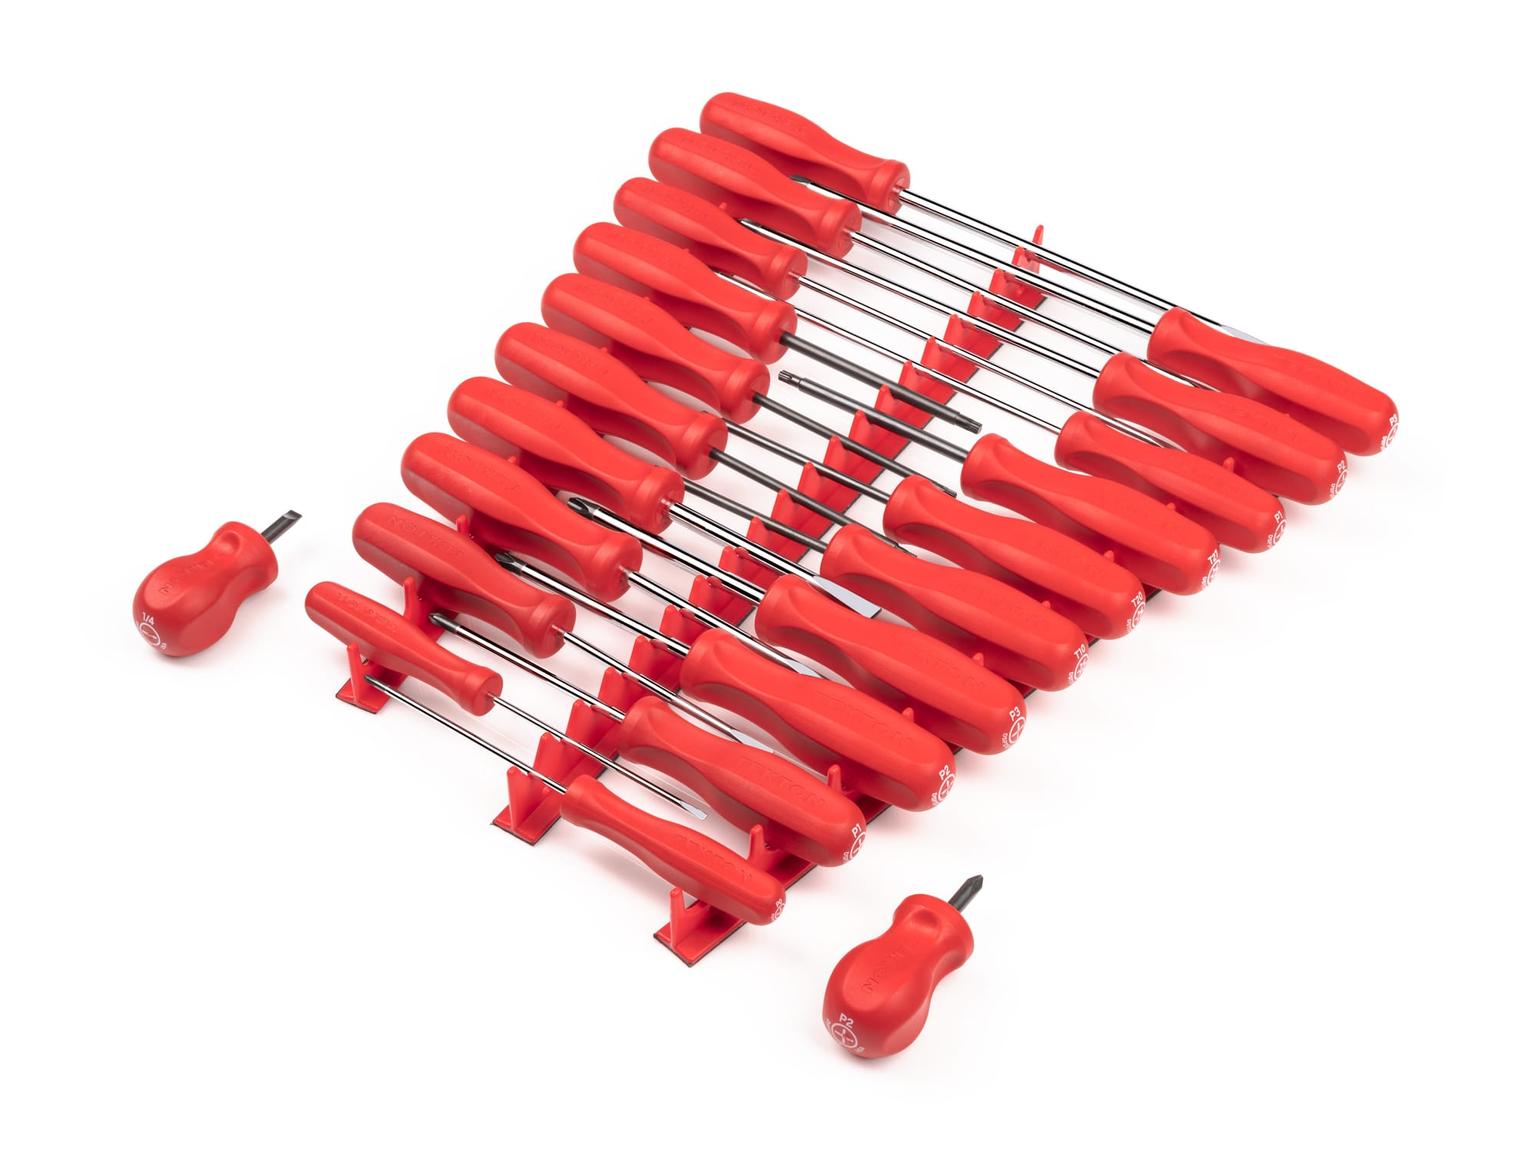 TEKTON DRV44501-T Hard Handle Screwdriver Set with Red Rails, 22-Piece (#0-#3, 1/8-5/16 in., T10-30)